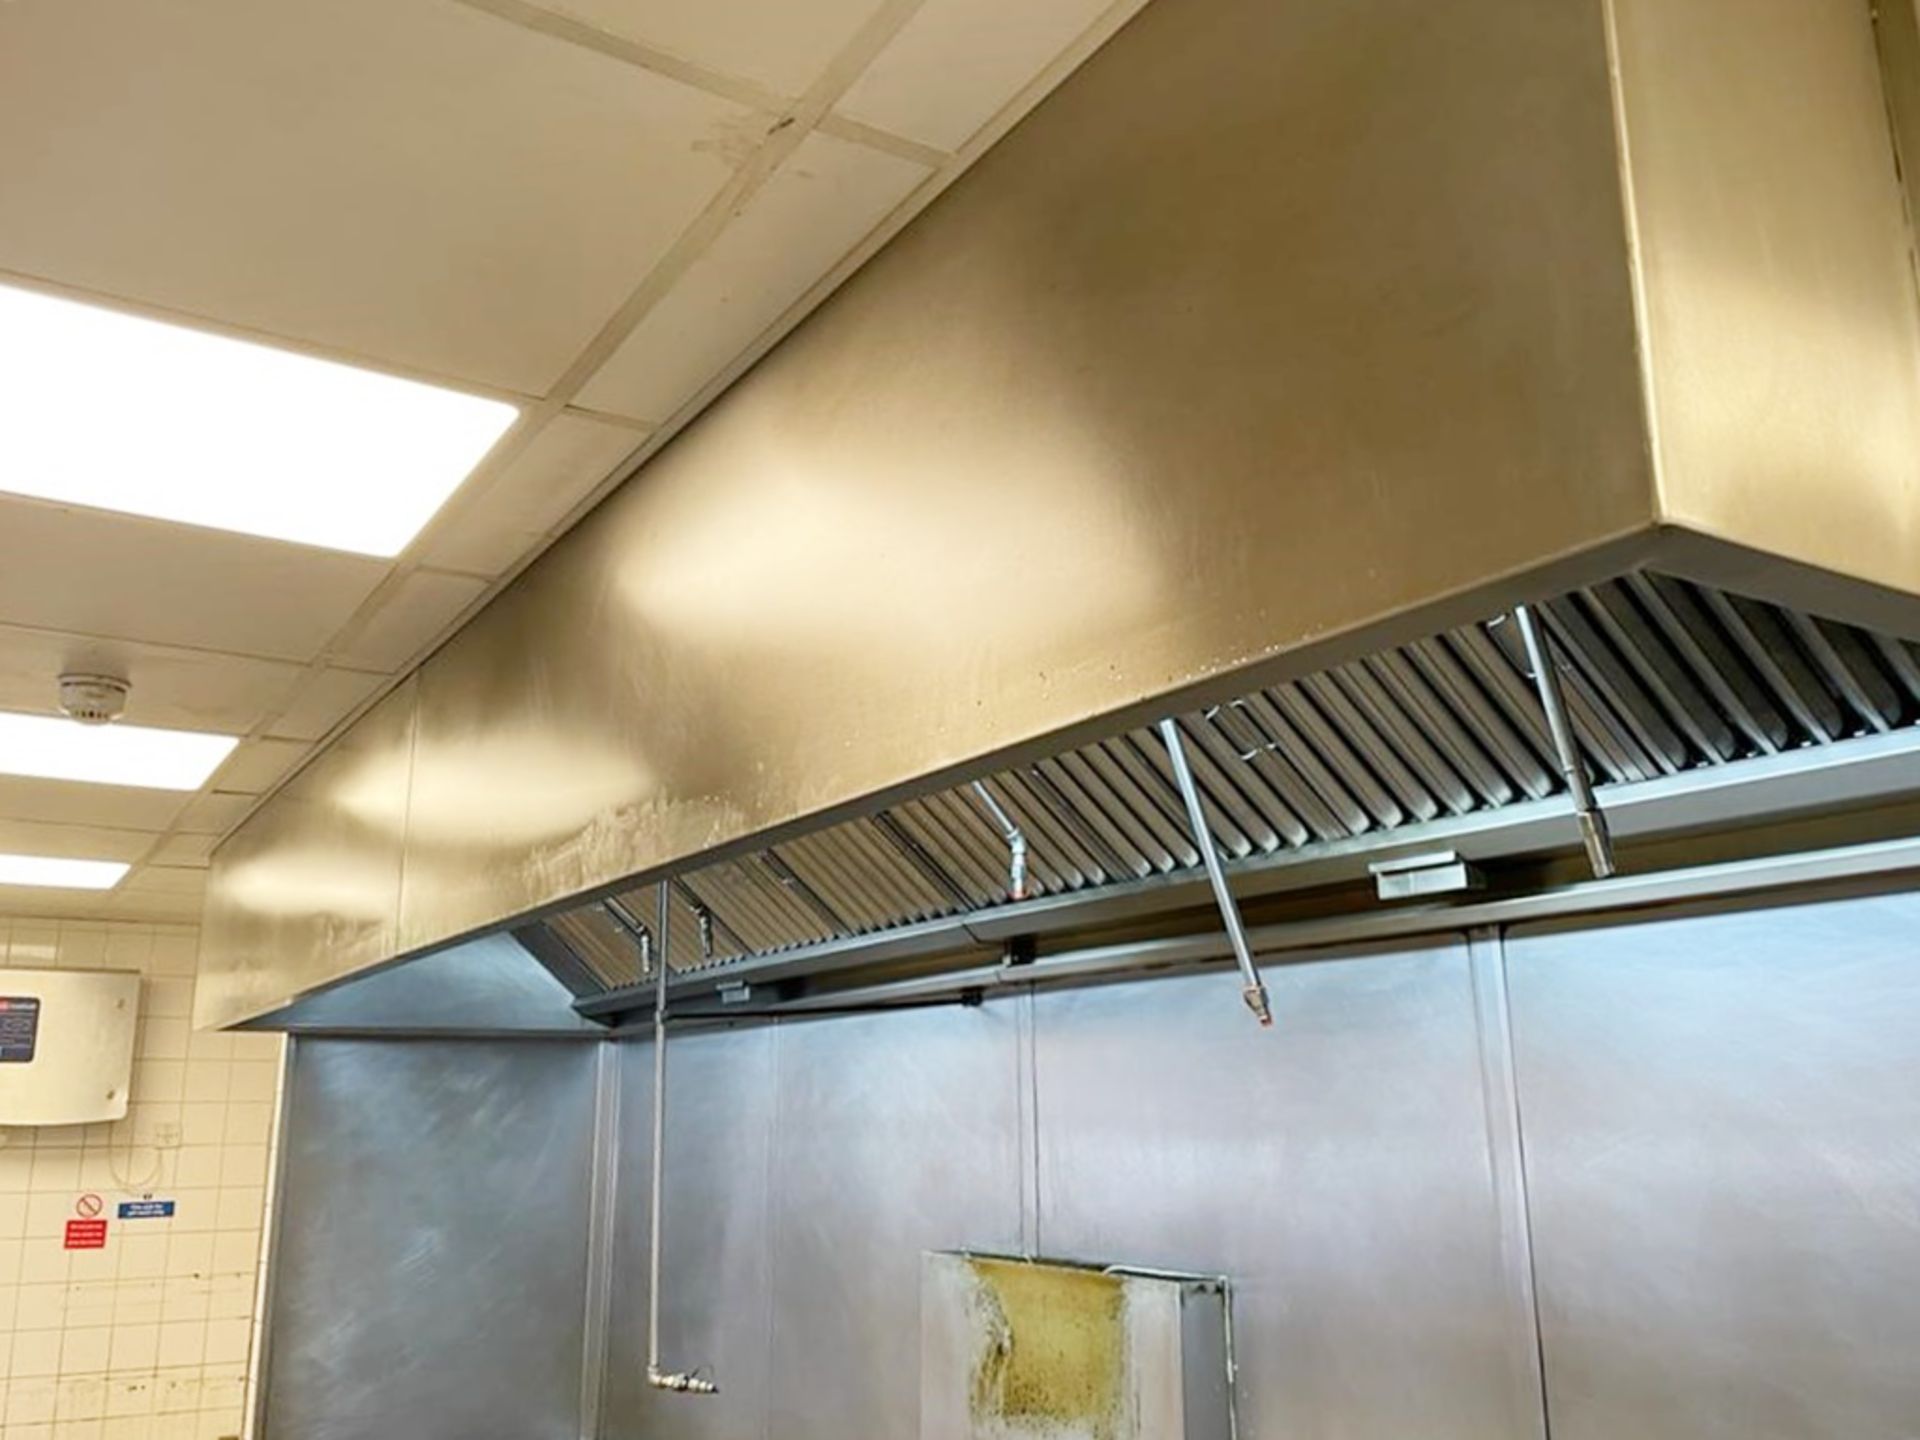 1 x Large Commercial Kitchen Extractor Canopy With Filters and Fire Suppression Fixtures - Stainless - Image 4 of 7